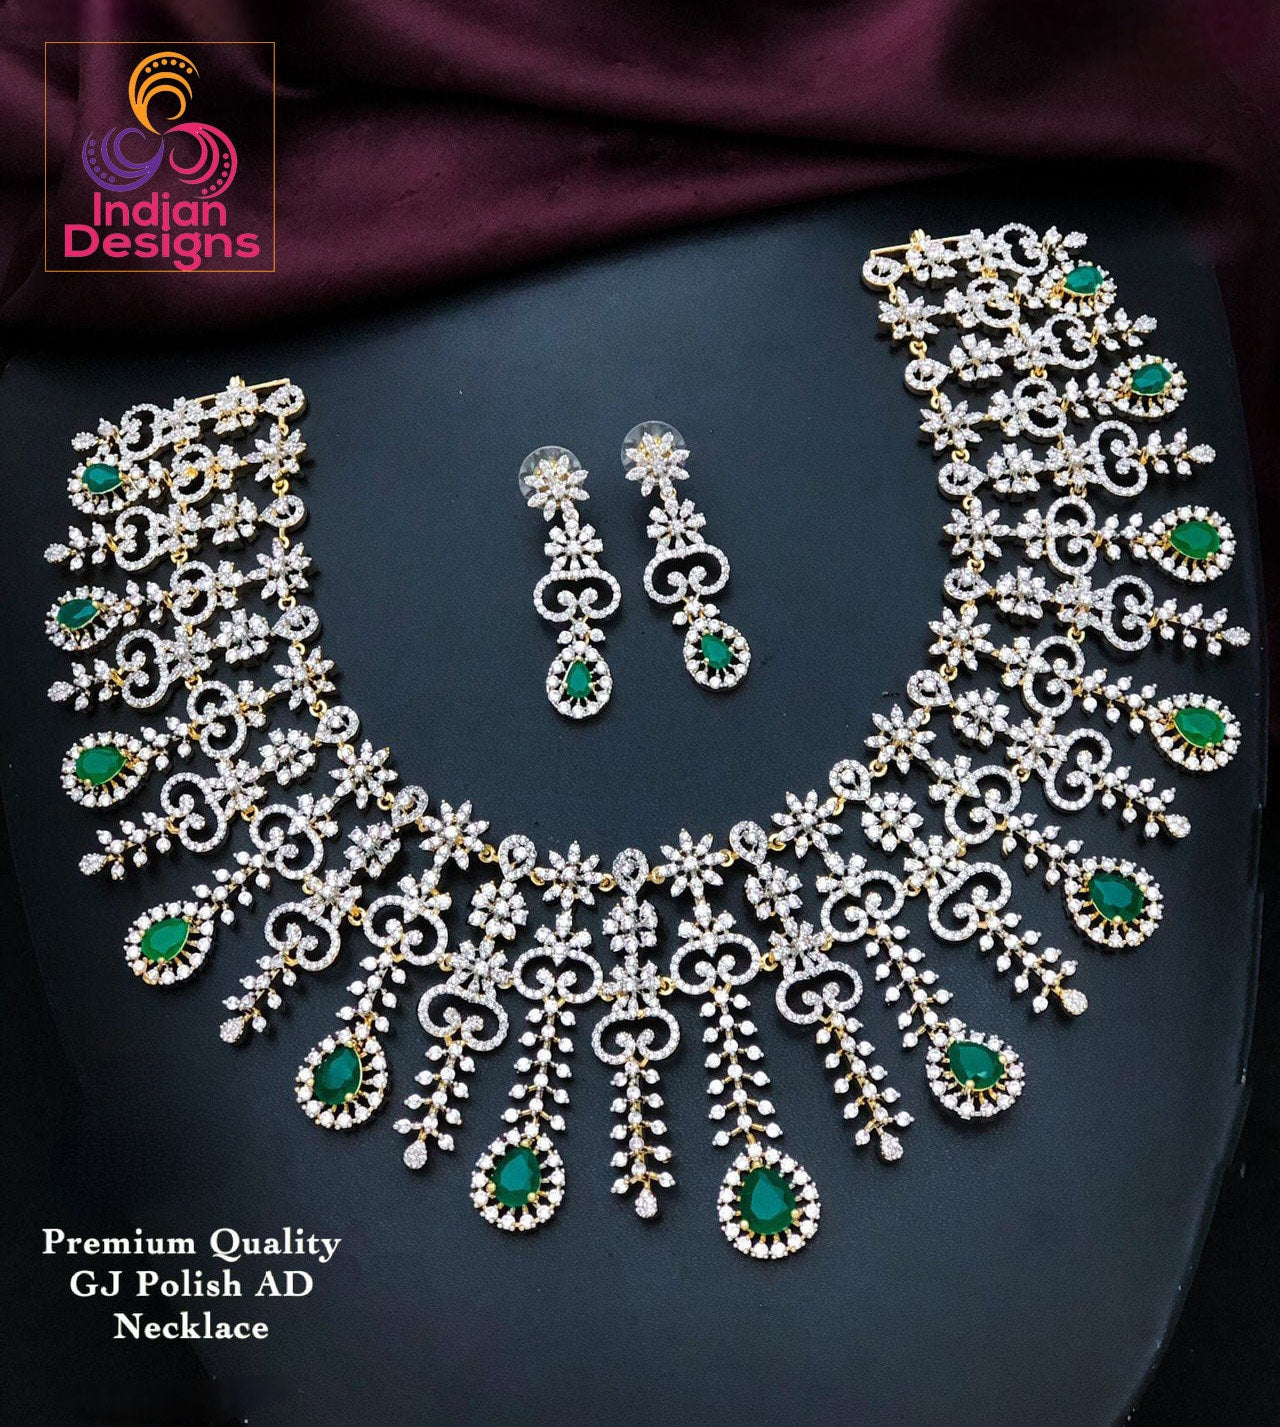 American Diamond Bridal Wedding Choker Necklace and Earring Set with Ruby Emerald stones|Statement Necklace|Indian Bollywood Style Necklace